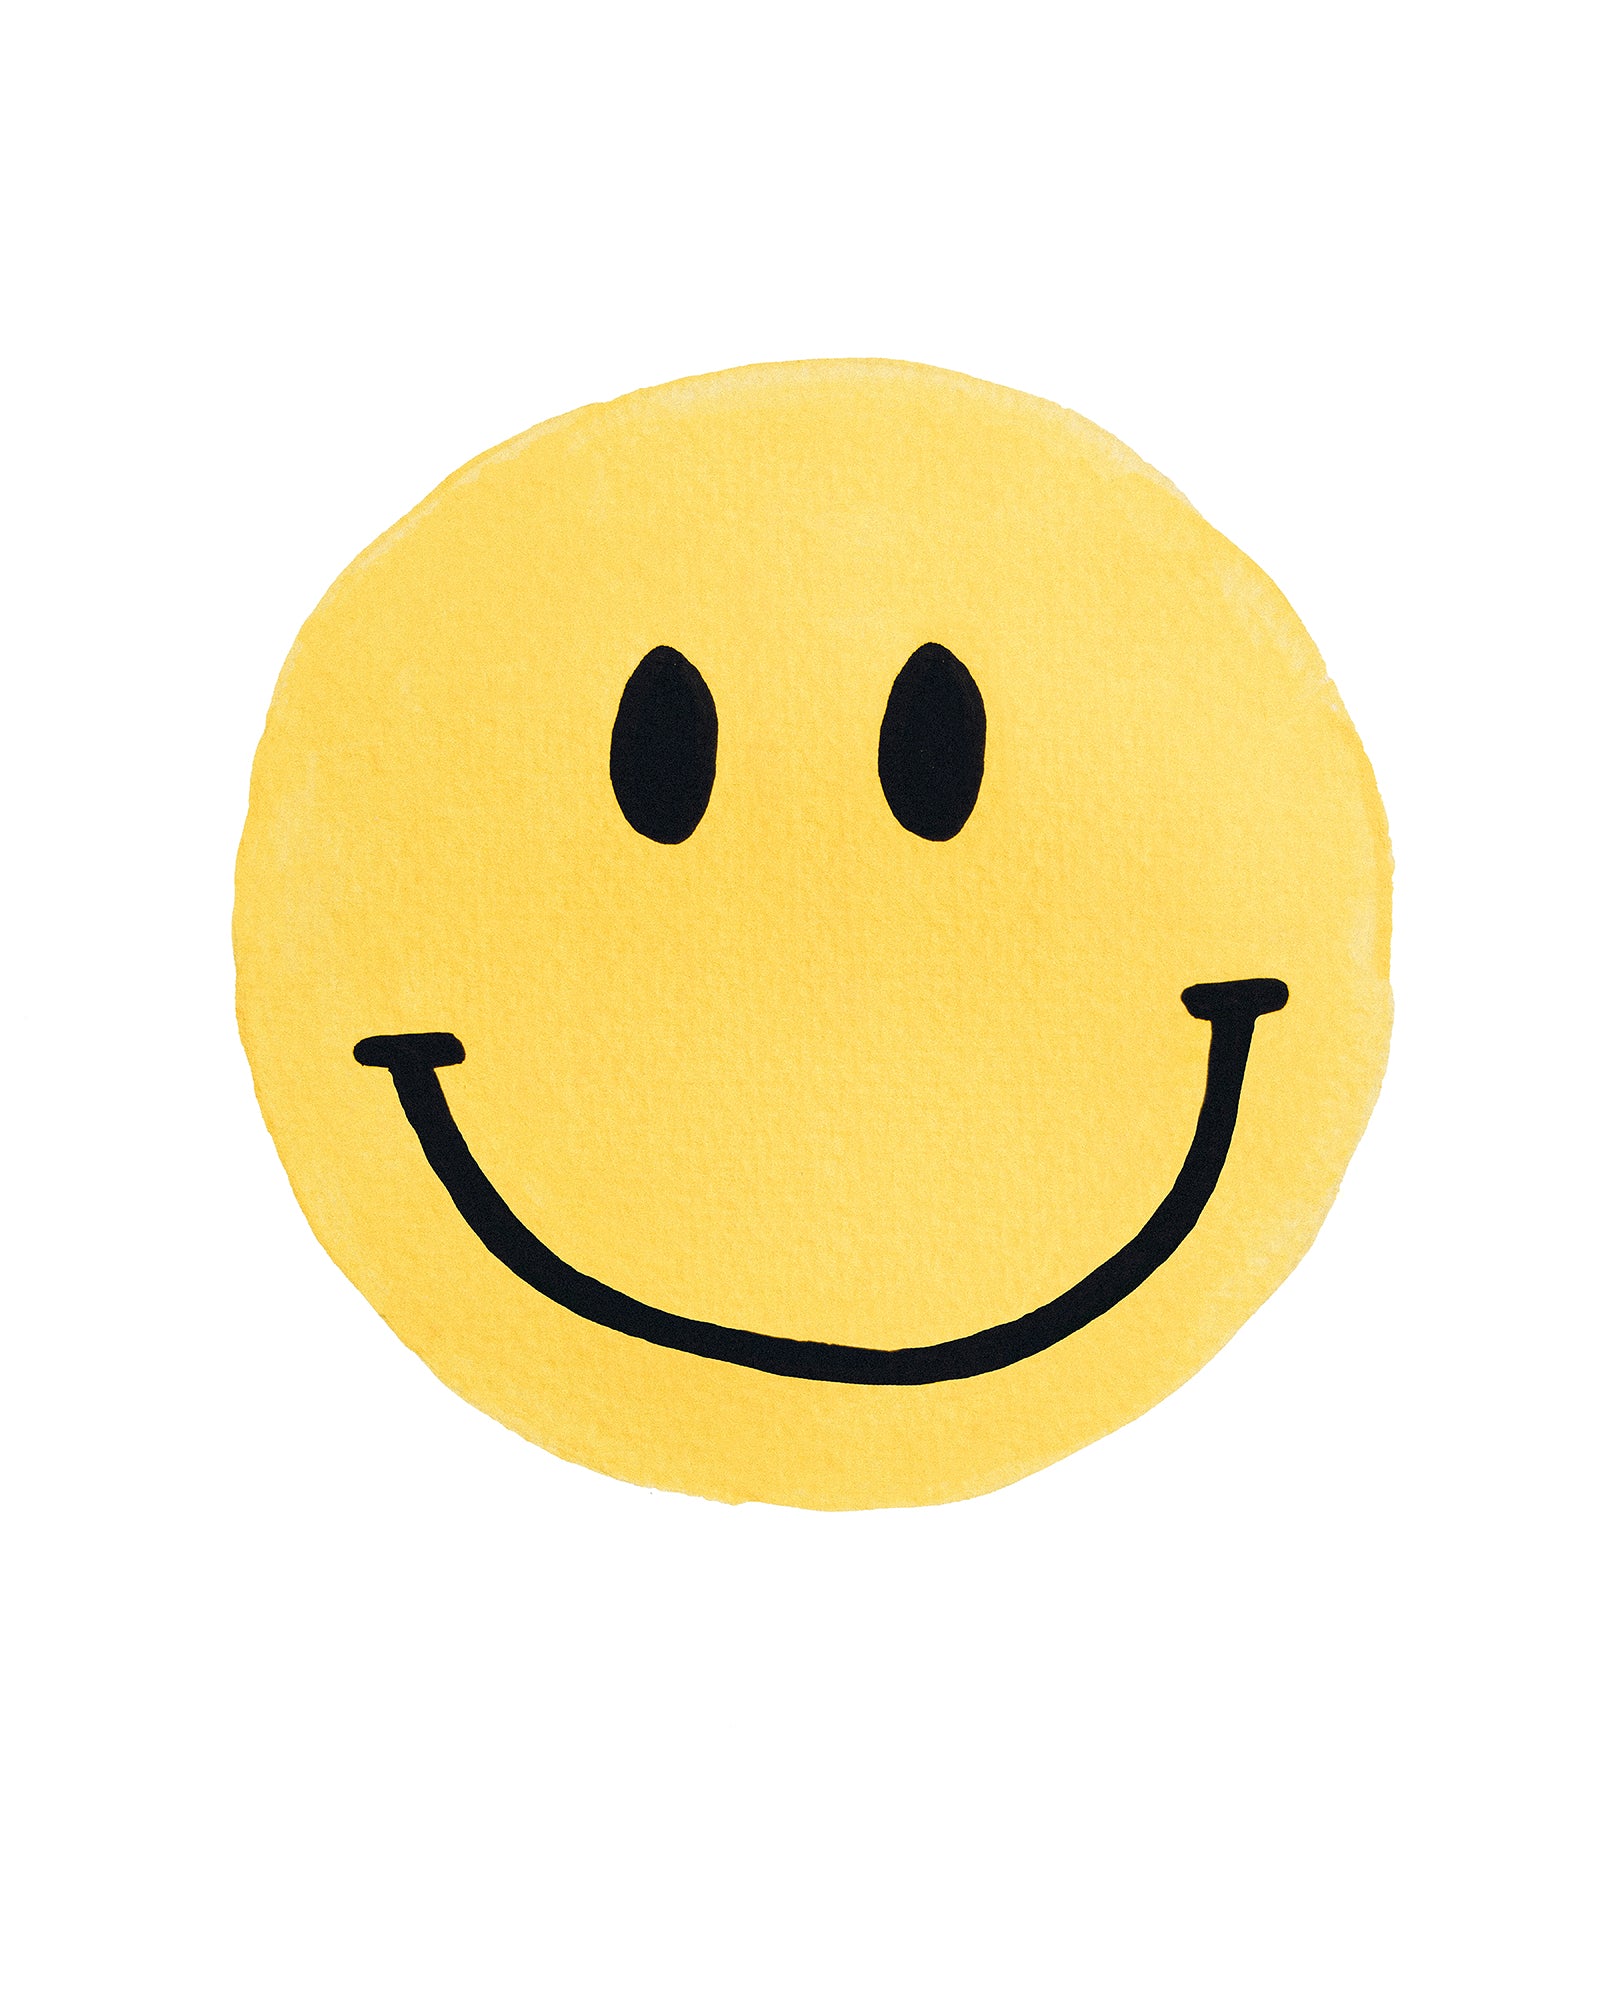 happy face images